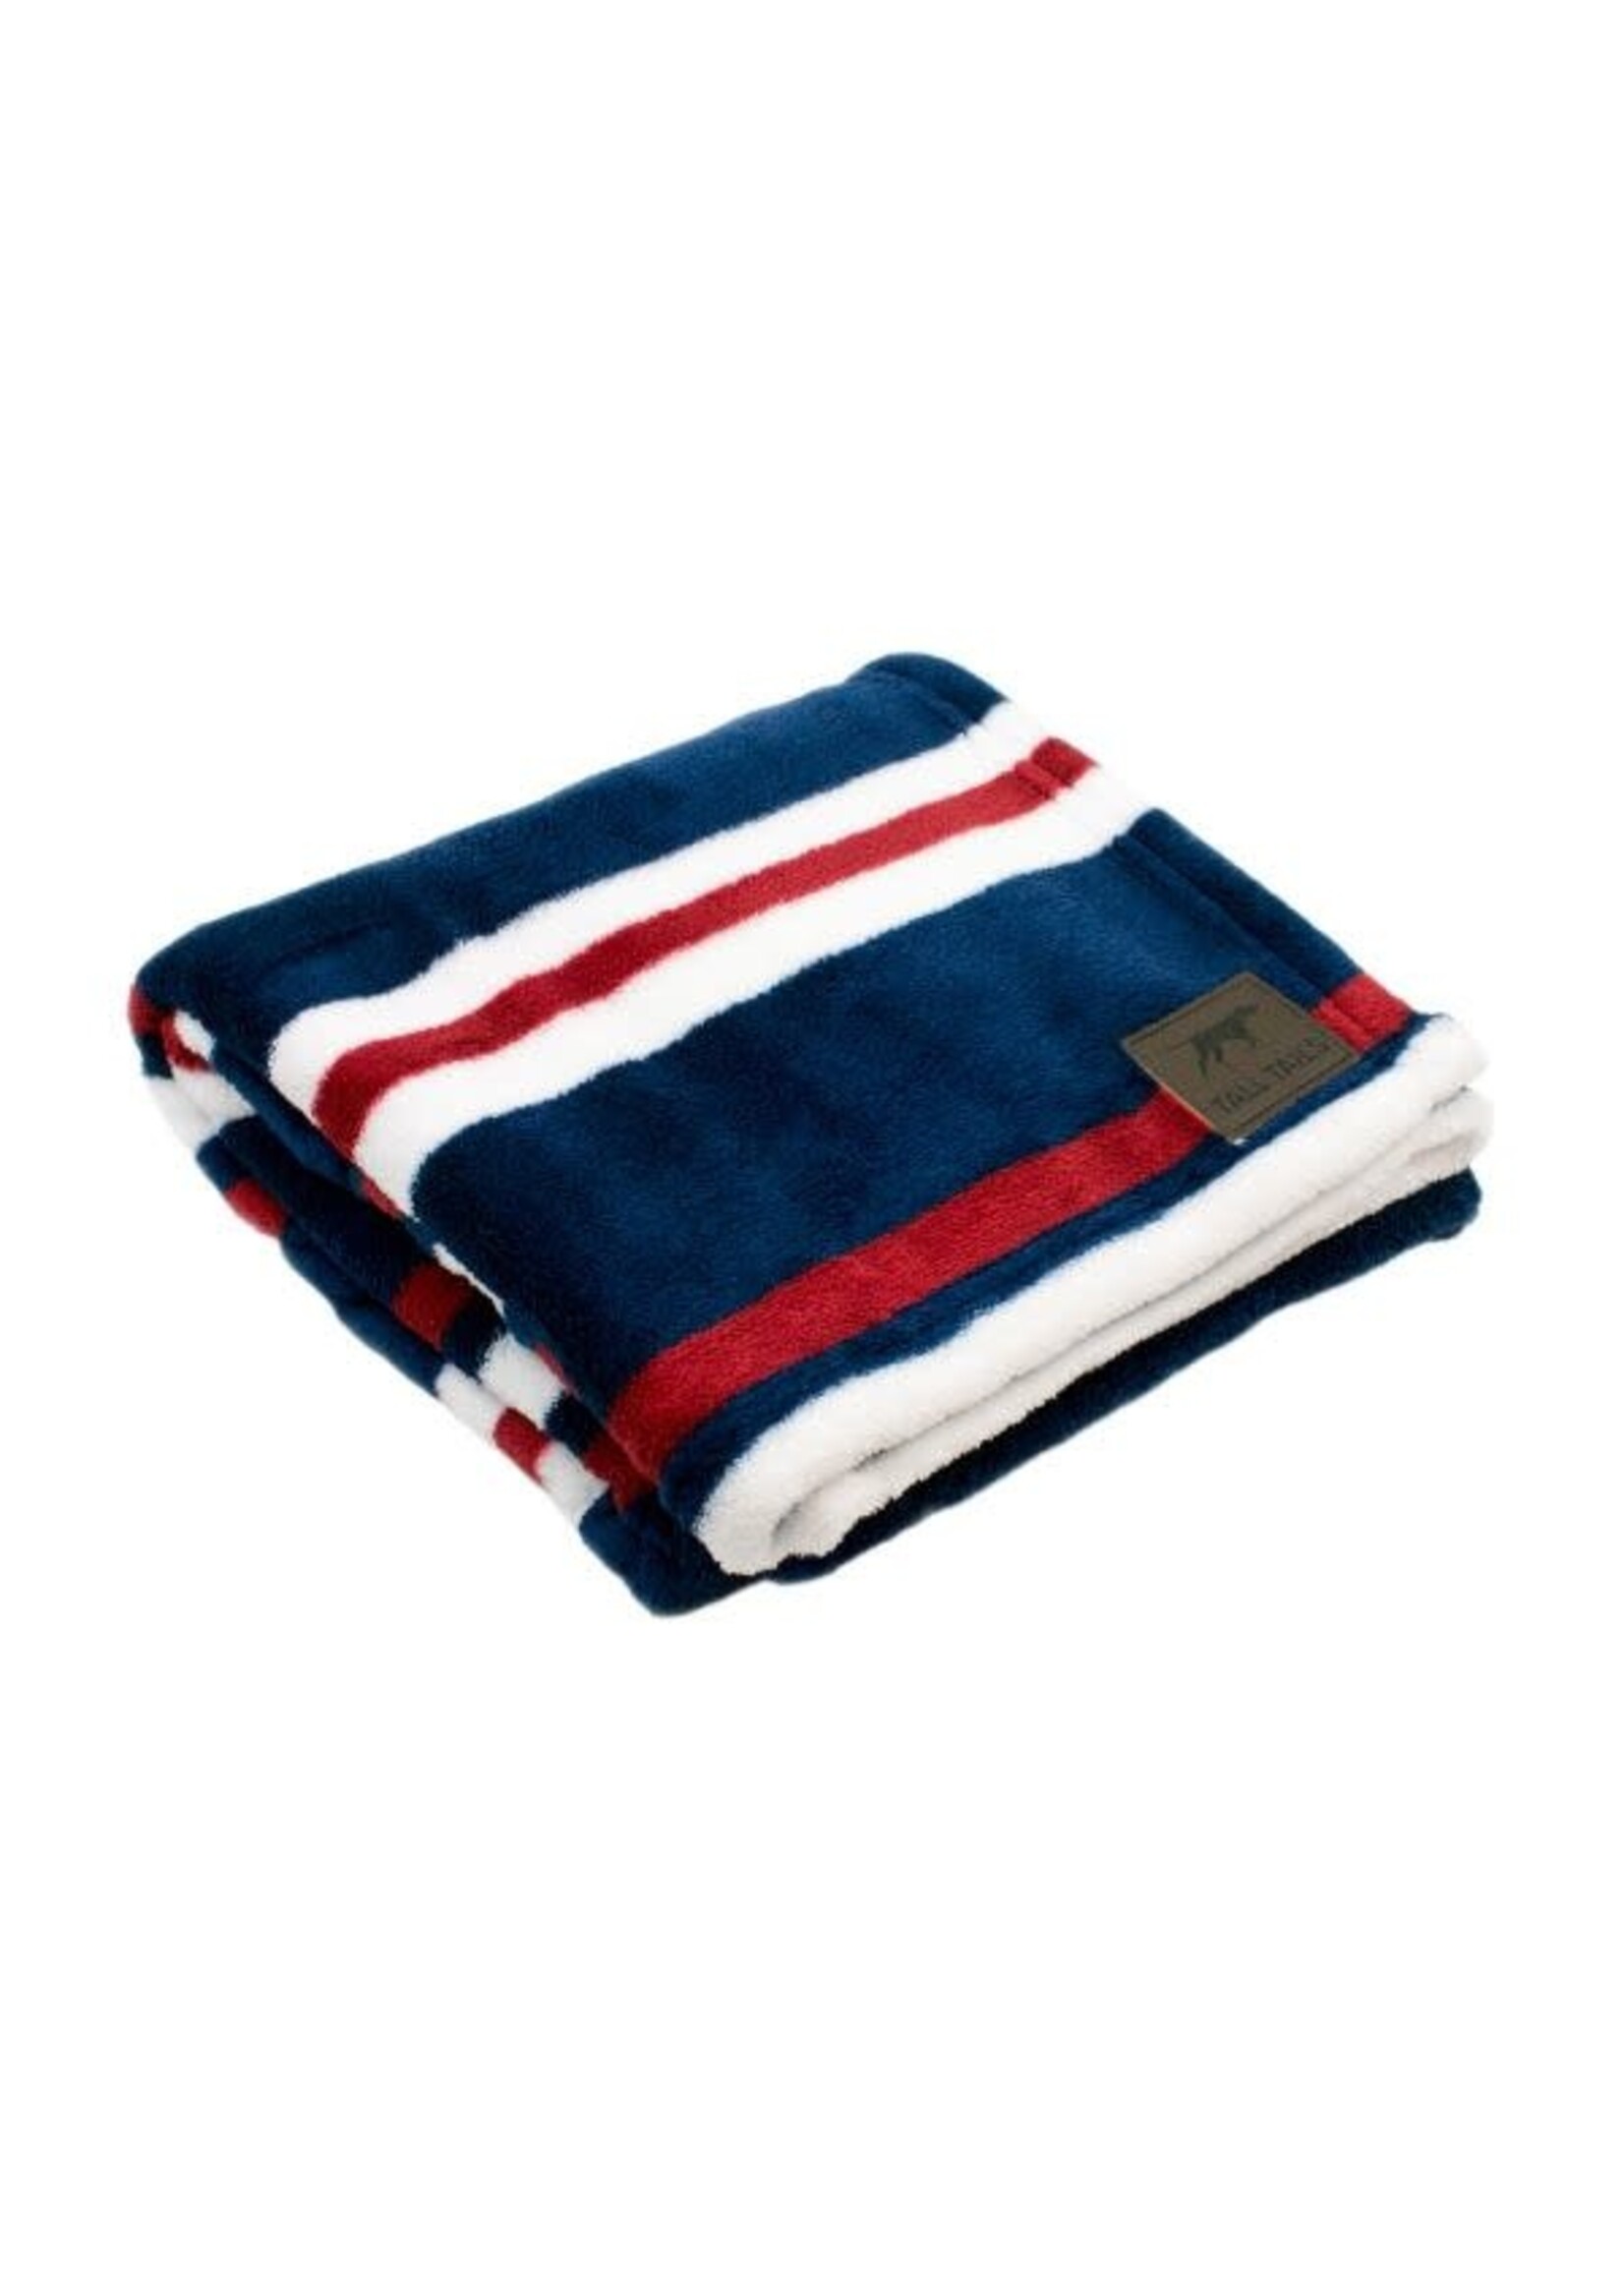 Tall Tails Tall Tails Fleece Blanket Nautical Stripe 30 x 40in